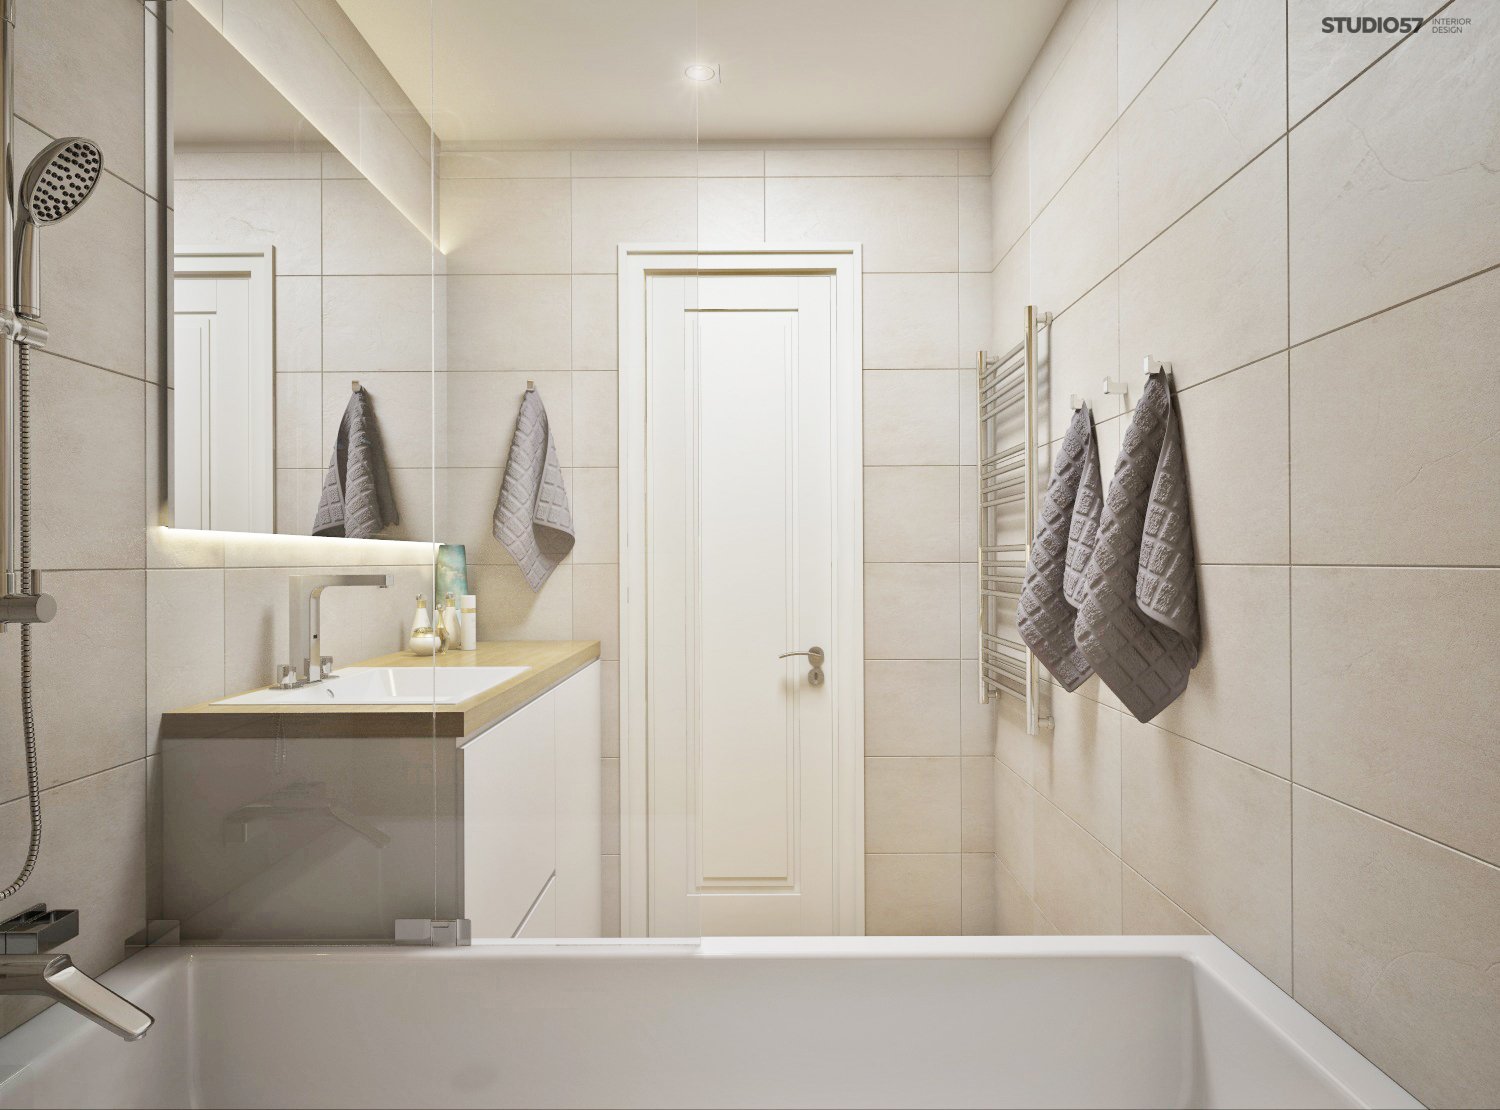 Bathroom in a modern style image